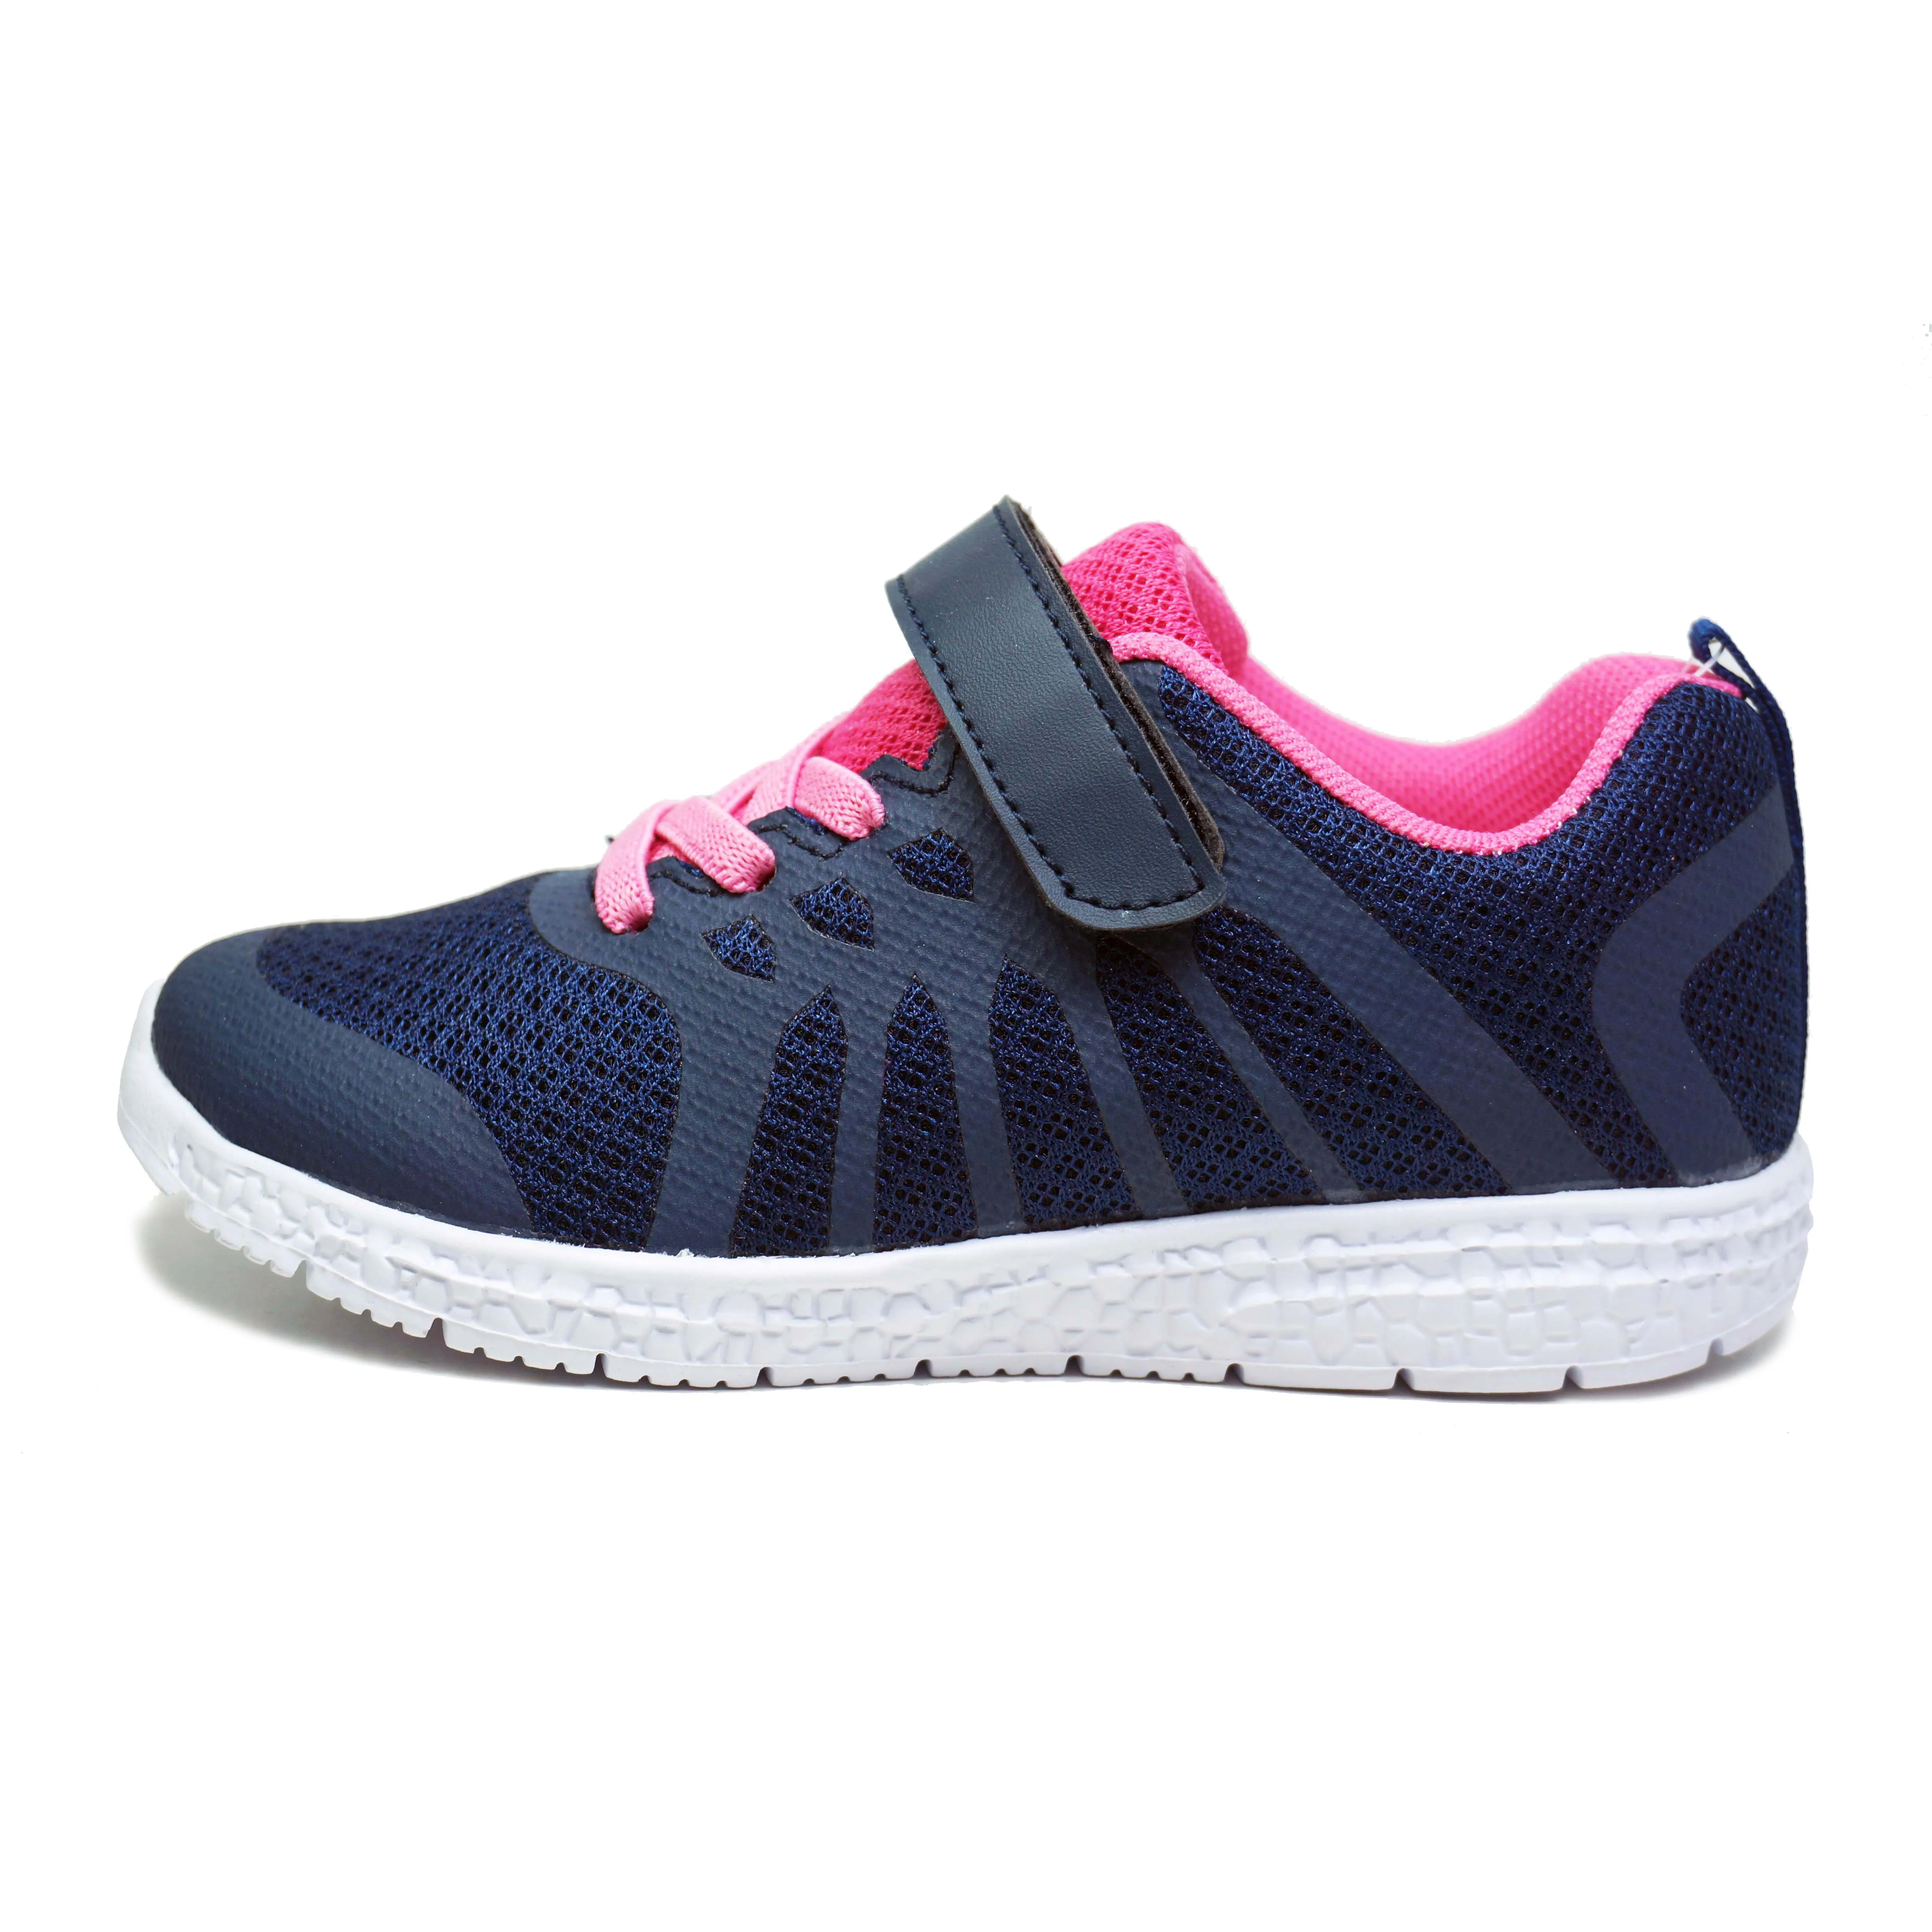 Offset Printing Girls Sneakers Sports Shoes - Buy Girls Sneakers,Girls ...